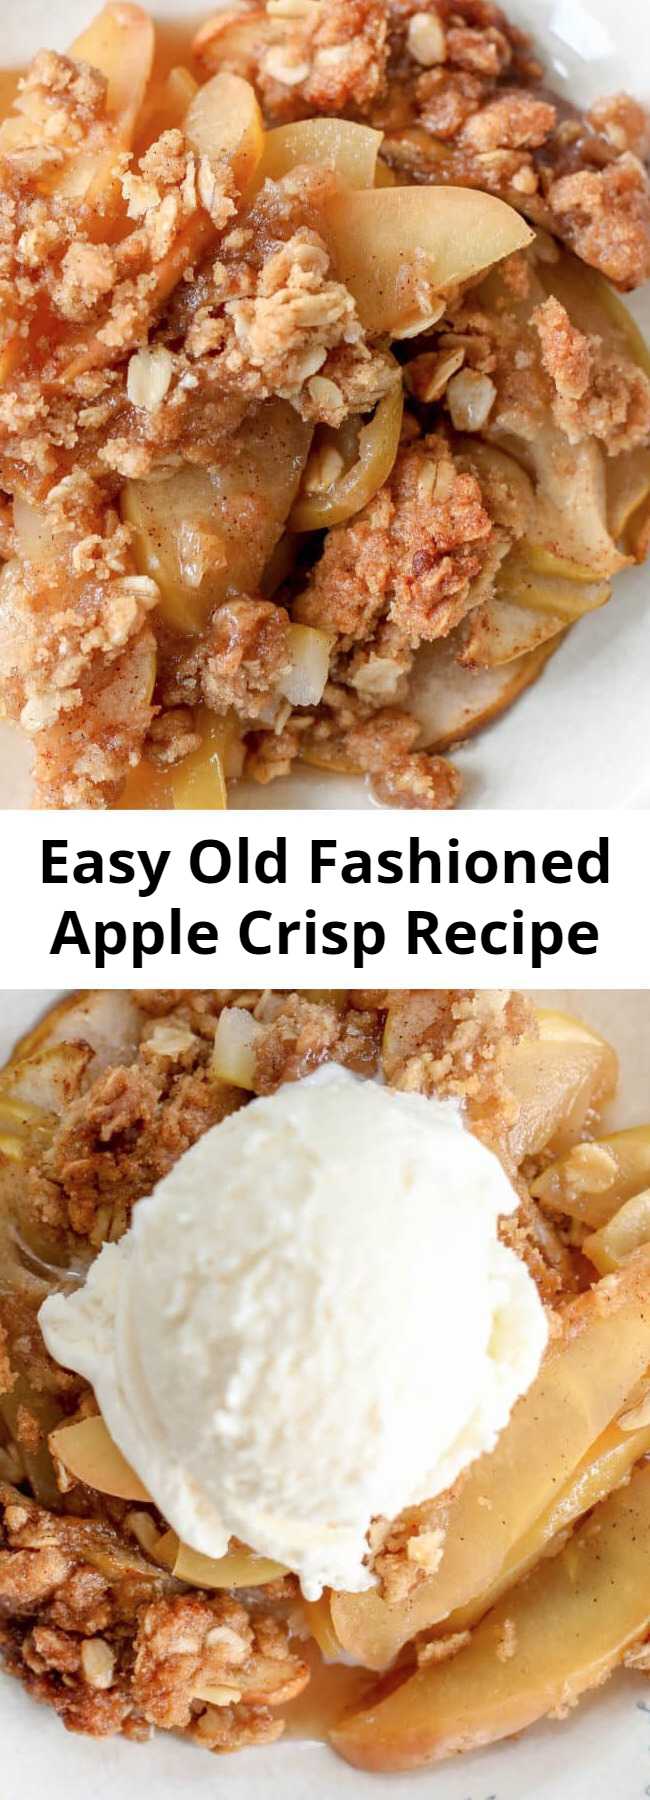 Easy Old Fashioned Apple Crisp Recipe - Buttery brown sugar and oat topping over sweet baked apples is a heavenly dessert year round. Topped with vanilla ice cream this is a classic dessert that's great for any occassion.